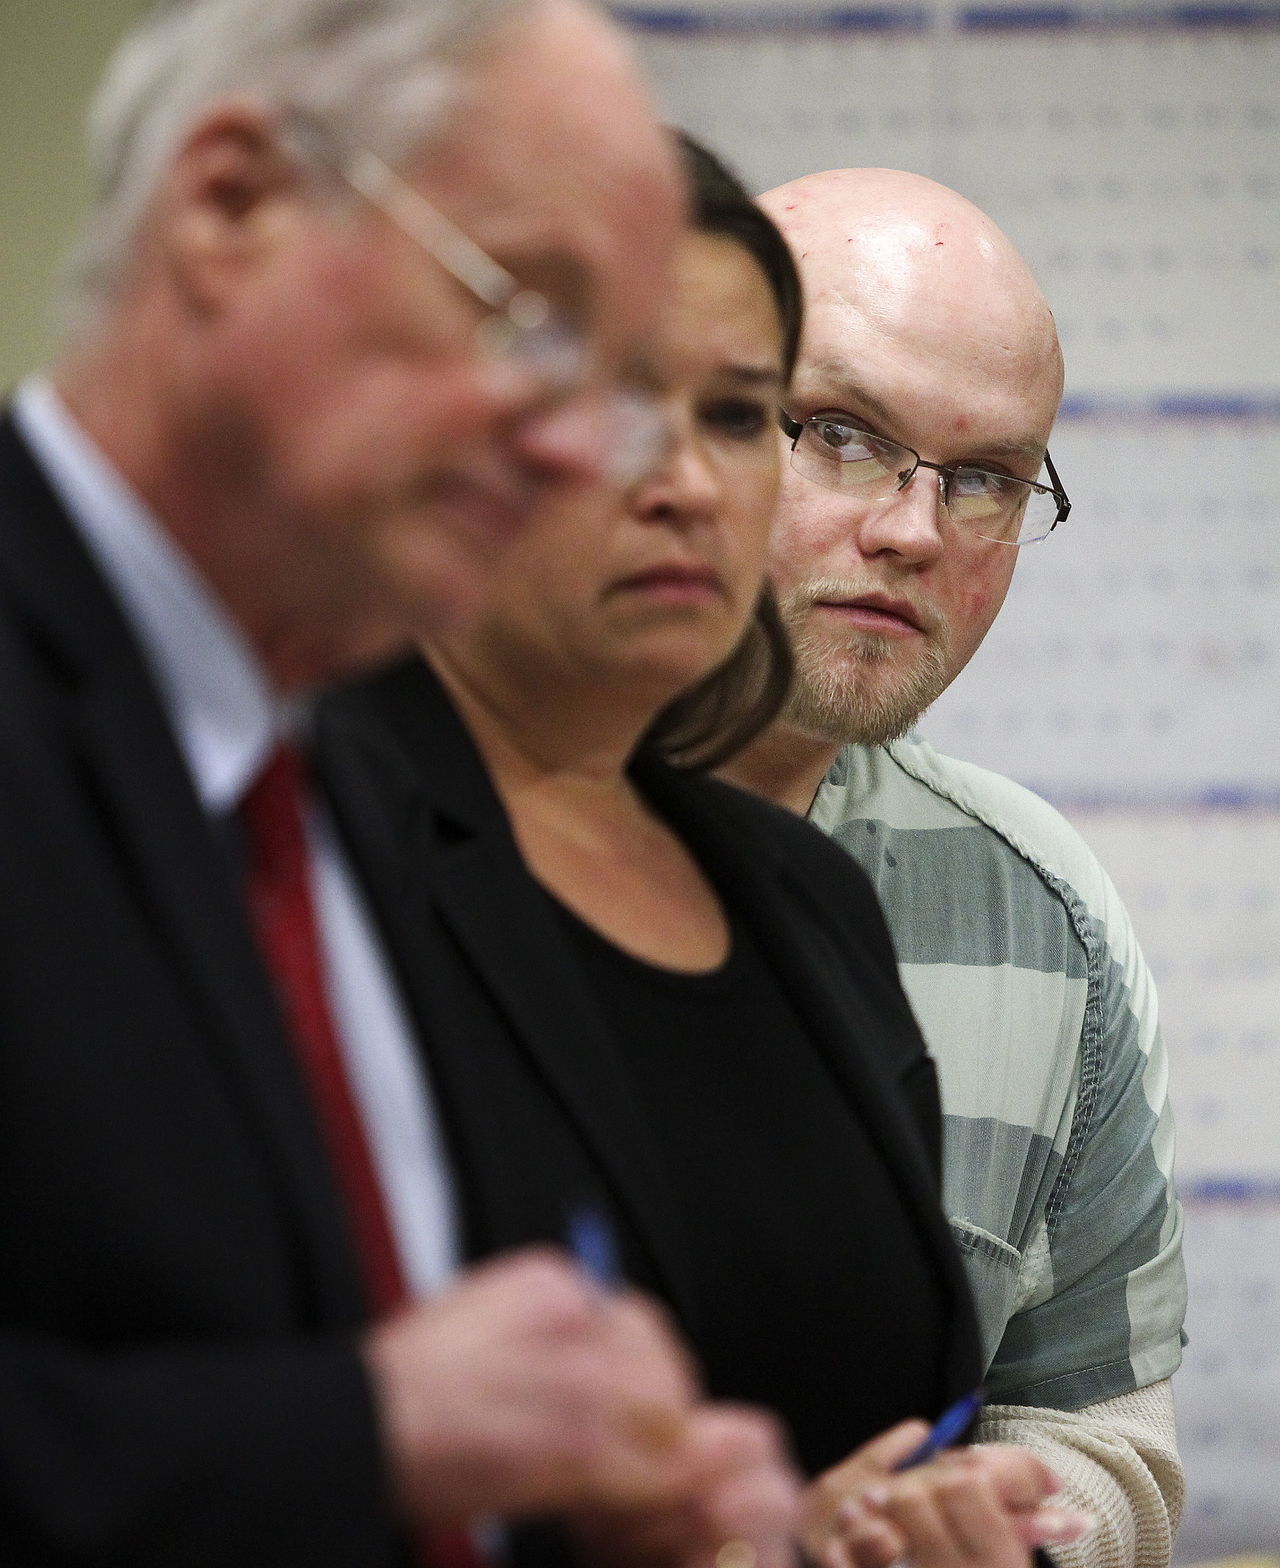 Daniel Rinker (right) waits in court during a sentencing hearing Monday, Feb. 1, 2016 at the Snohomish County Courthouse. Rinker was sentenced to 28 years in prison for the murder of Jessica Jones, a Tulalip woman, who was found shot to death in an Arlington garage on April 8, 2014.